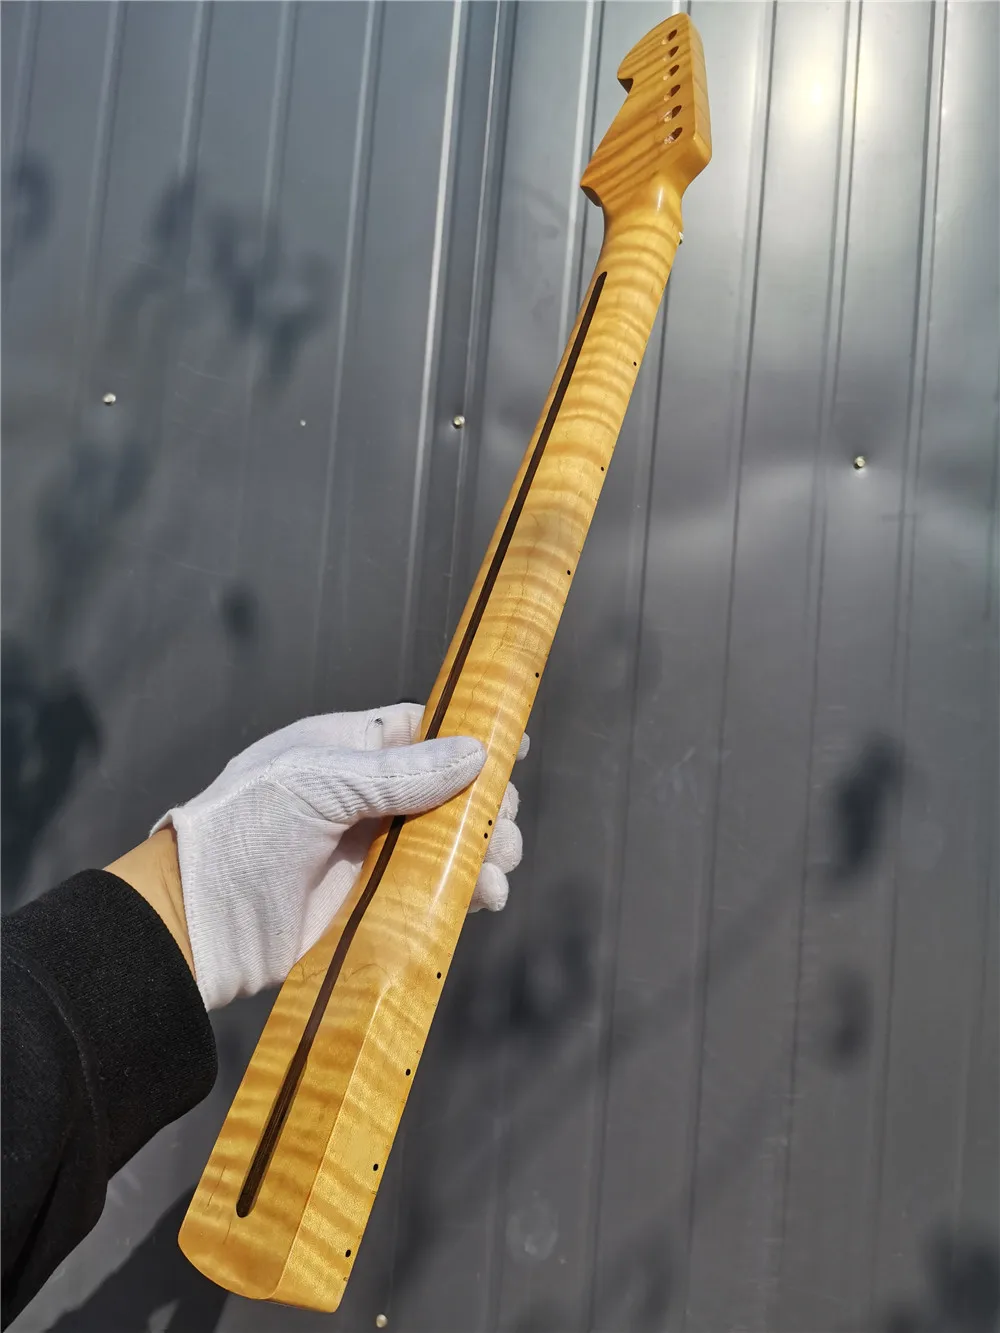 

48#Tiger Flame Maple Guitar Neck 21 Fret 25.5inch Dark Yellow Varnish Pearl Maple Made Fingerboard Dot Inlay DIY